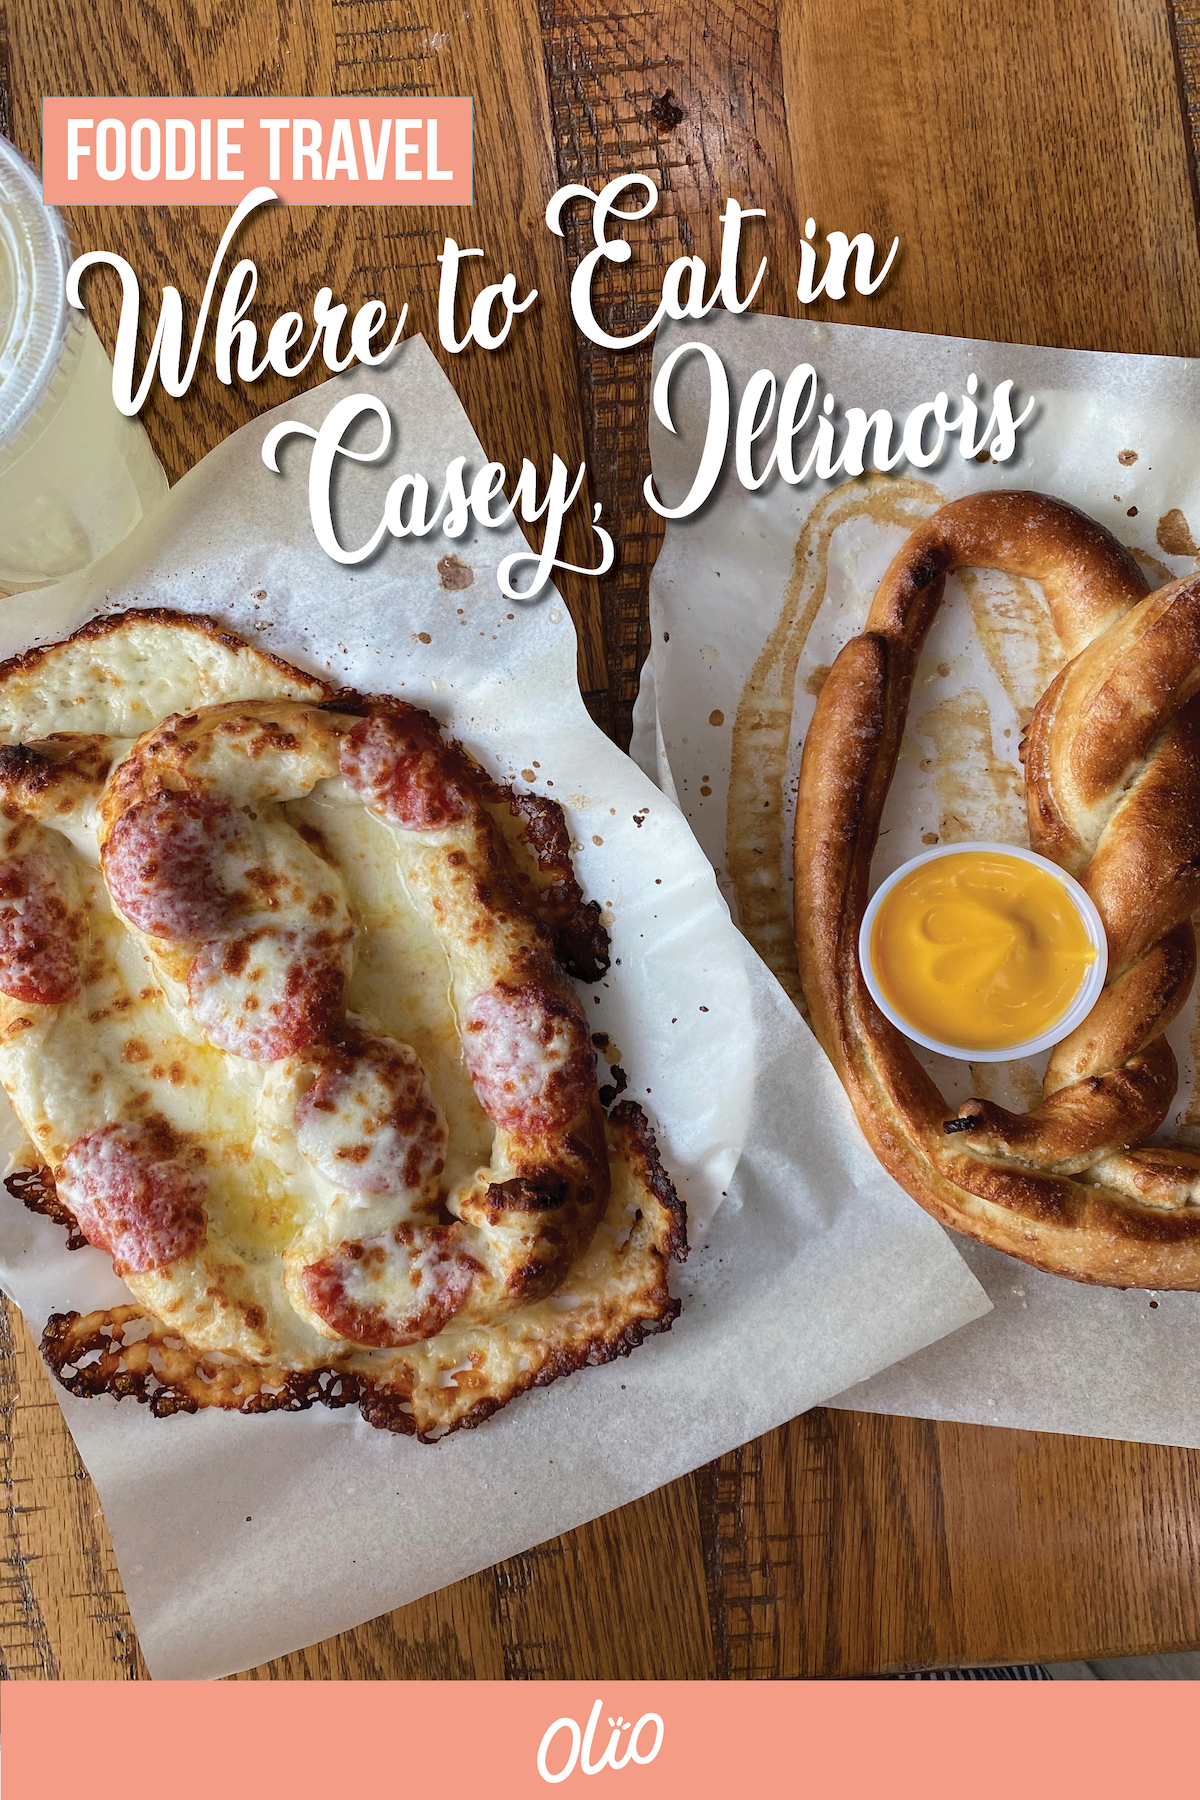 There are lots of amazing places to eat in Casey, Illinois! From hearty American fare and Chicago-style pizza to unbelievable giant pretzels and homemade ice cream, there's something for every taste in this small town.